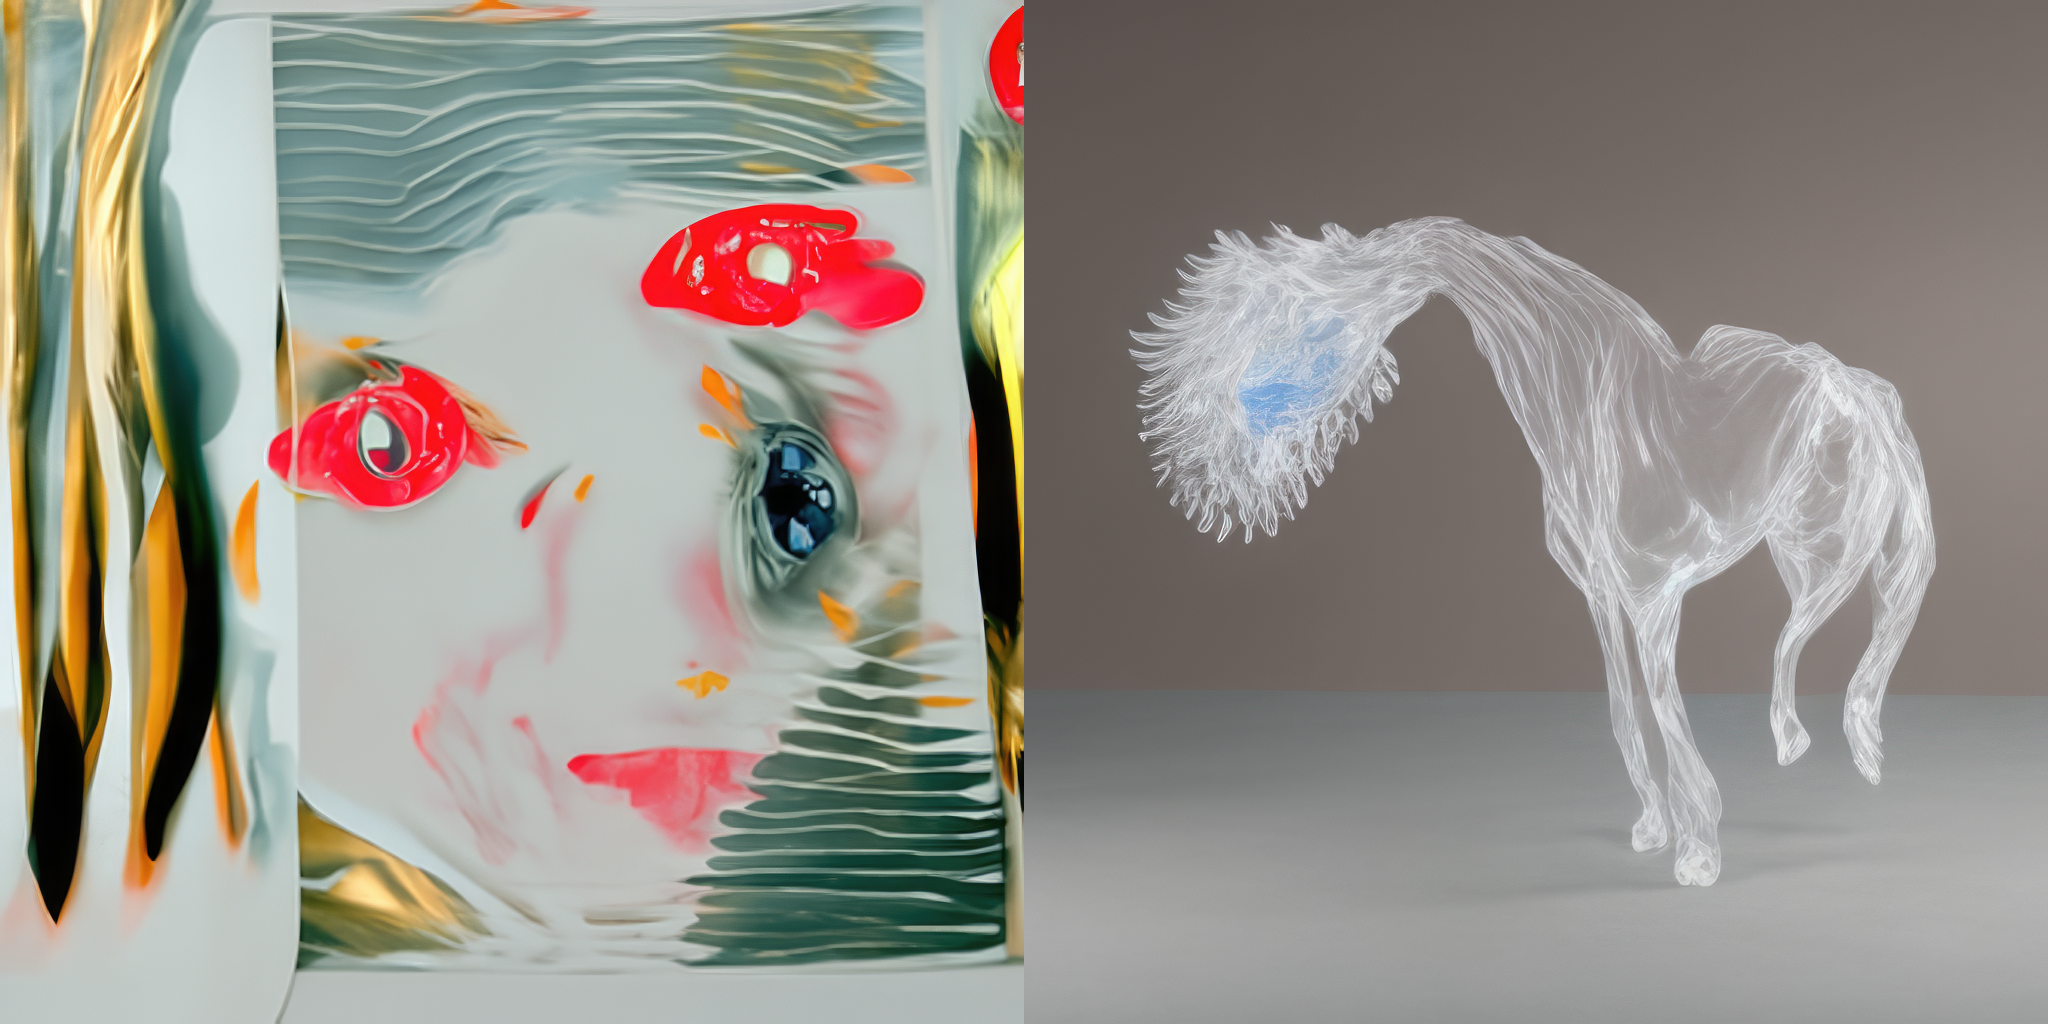 "Holly Herndon" beacon mid-process (2021) / "Readyweight" embedding mid-process (2024)